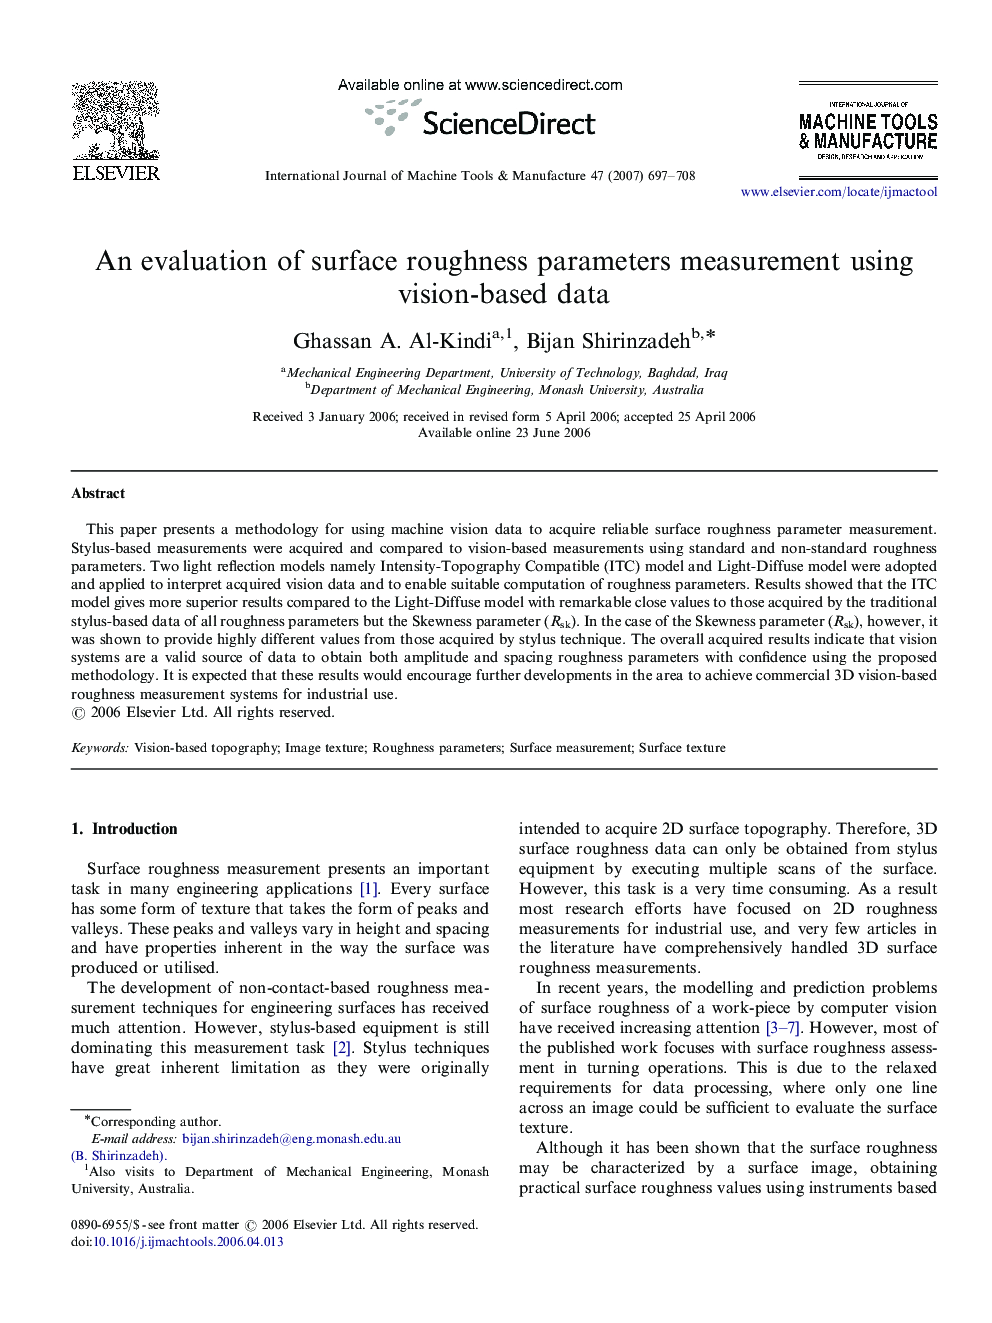 An evaluation of surface roughness parameters measurement using vision-based data